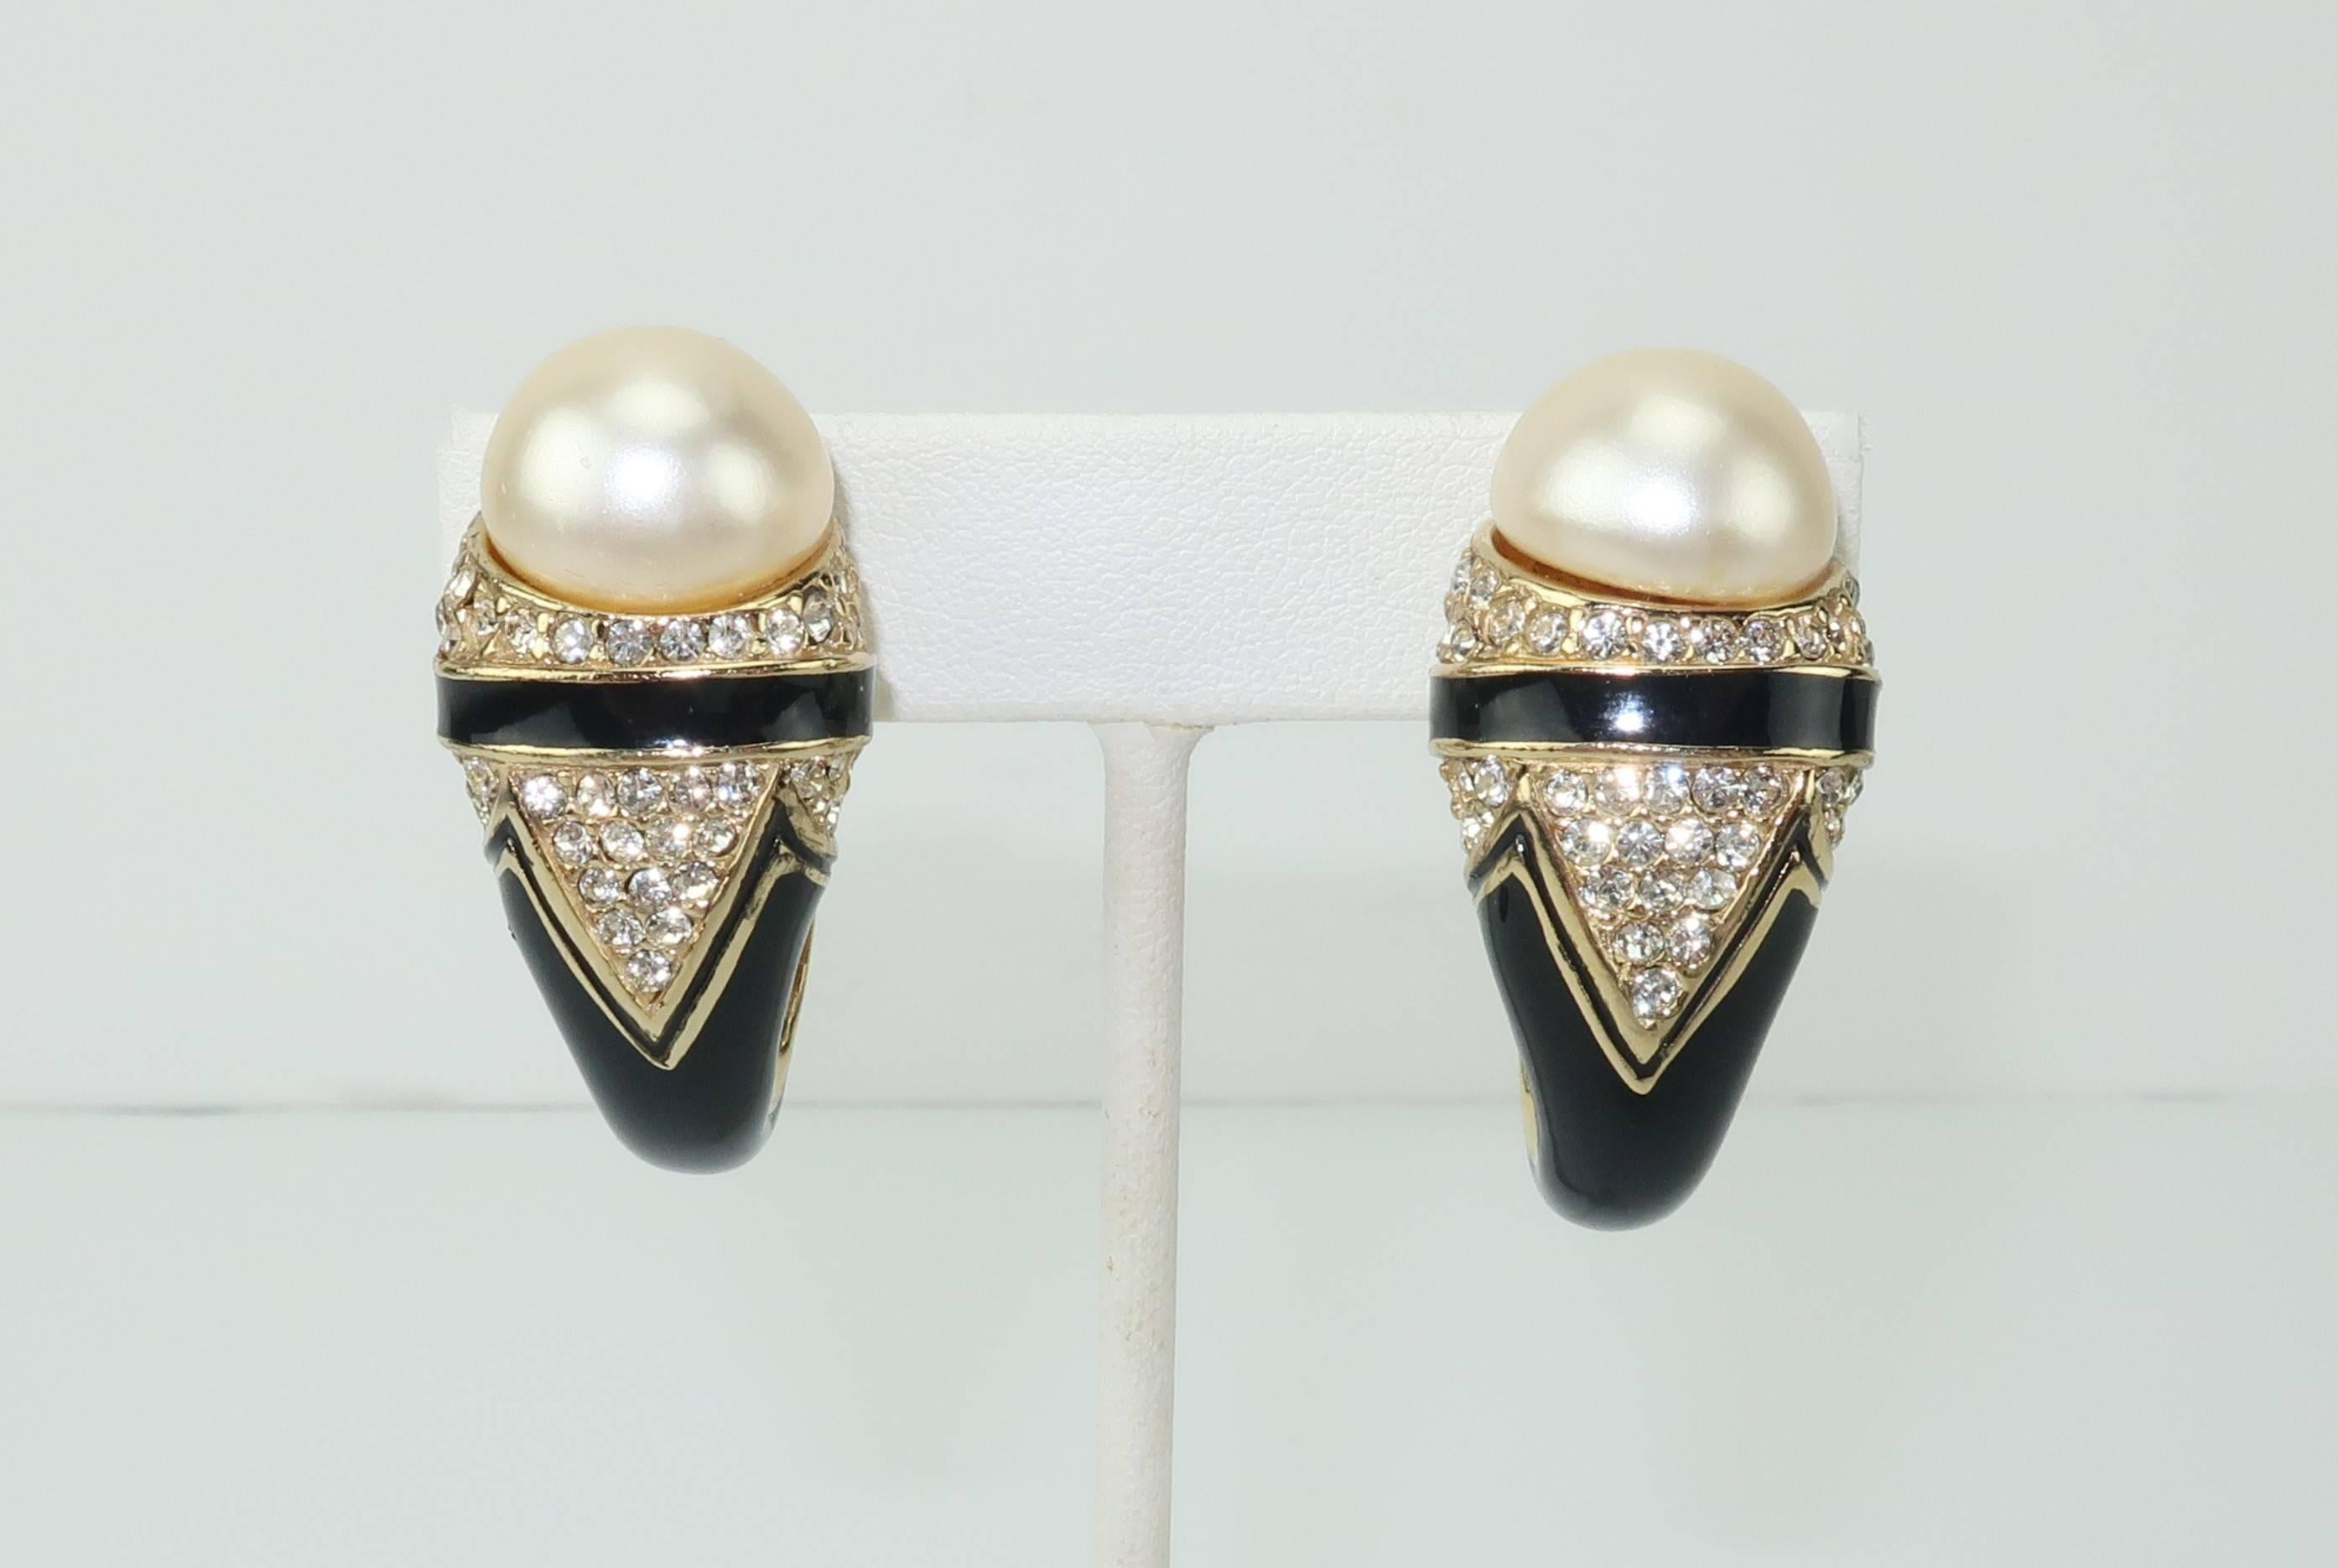 These 1980's clip on earrings are by Ciner, an American costume jewelry company known for producing high quality accessories since the 1930's.  The curved black enamel body with glamorous Art Deco styling is embellished with small crystal